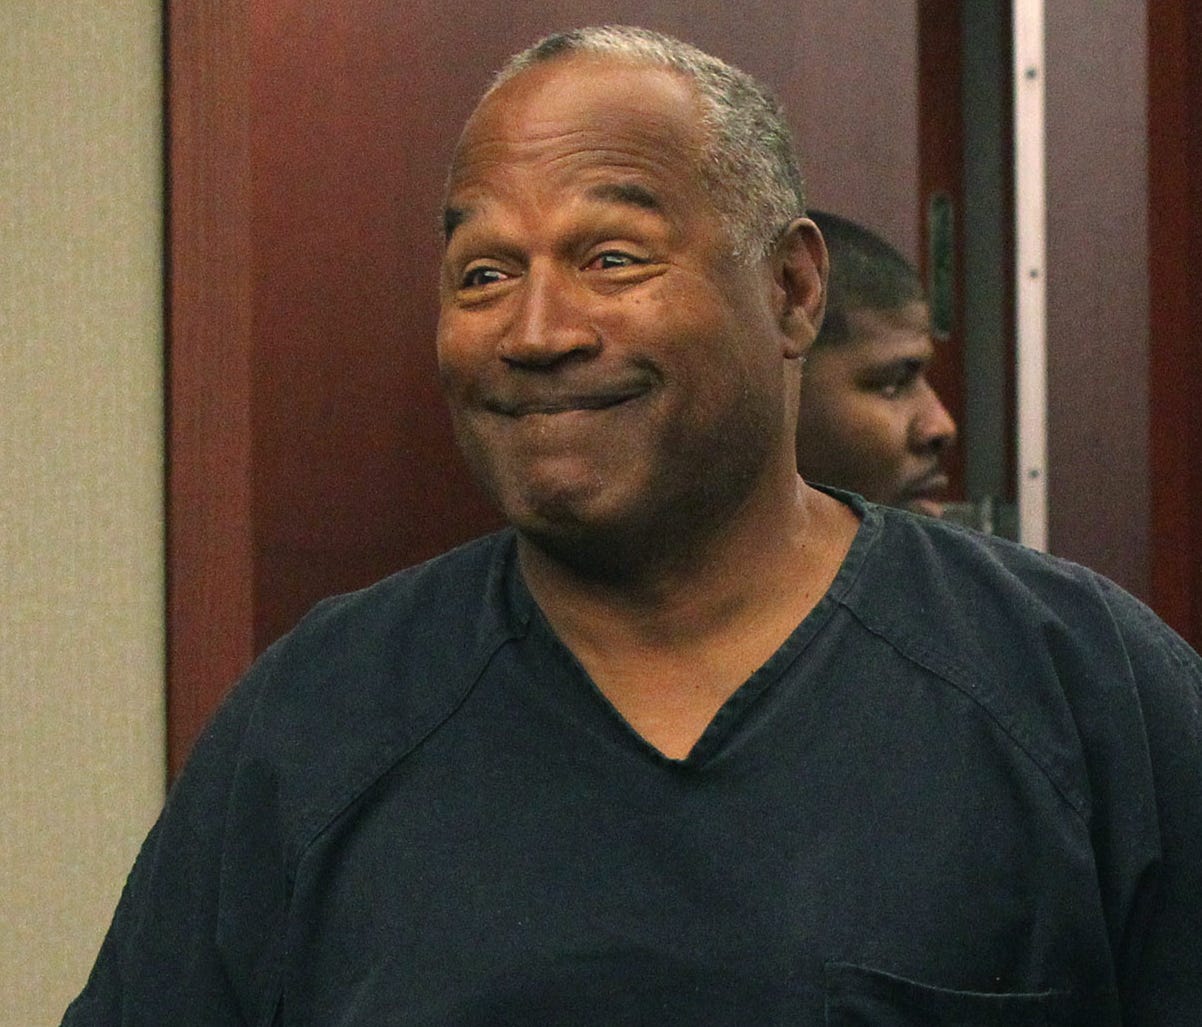 O.J. Simpson is going before a Nevada parole board Thursday.